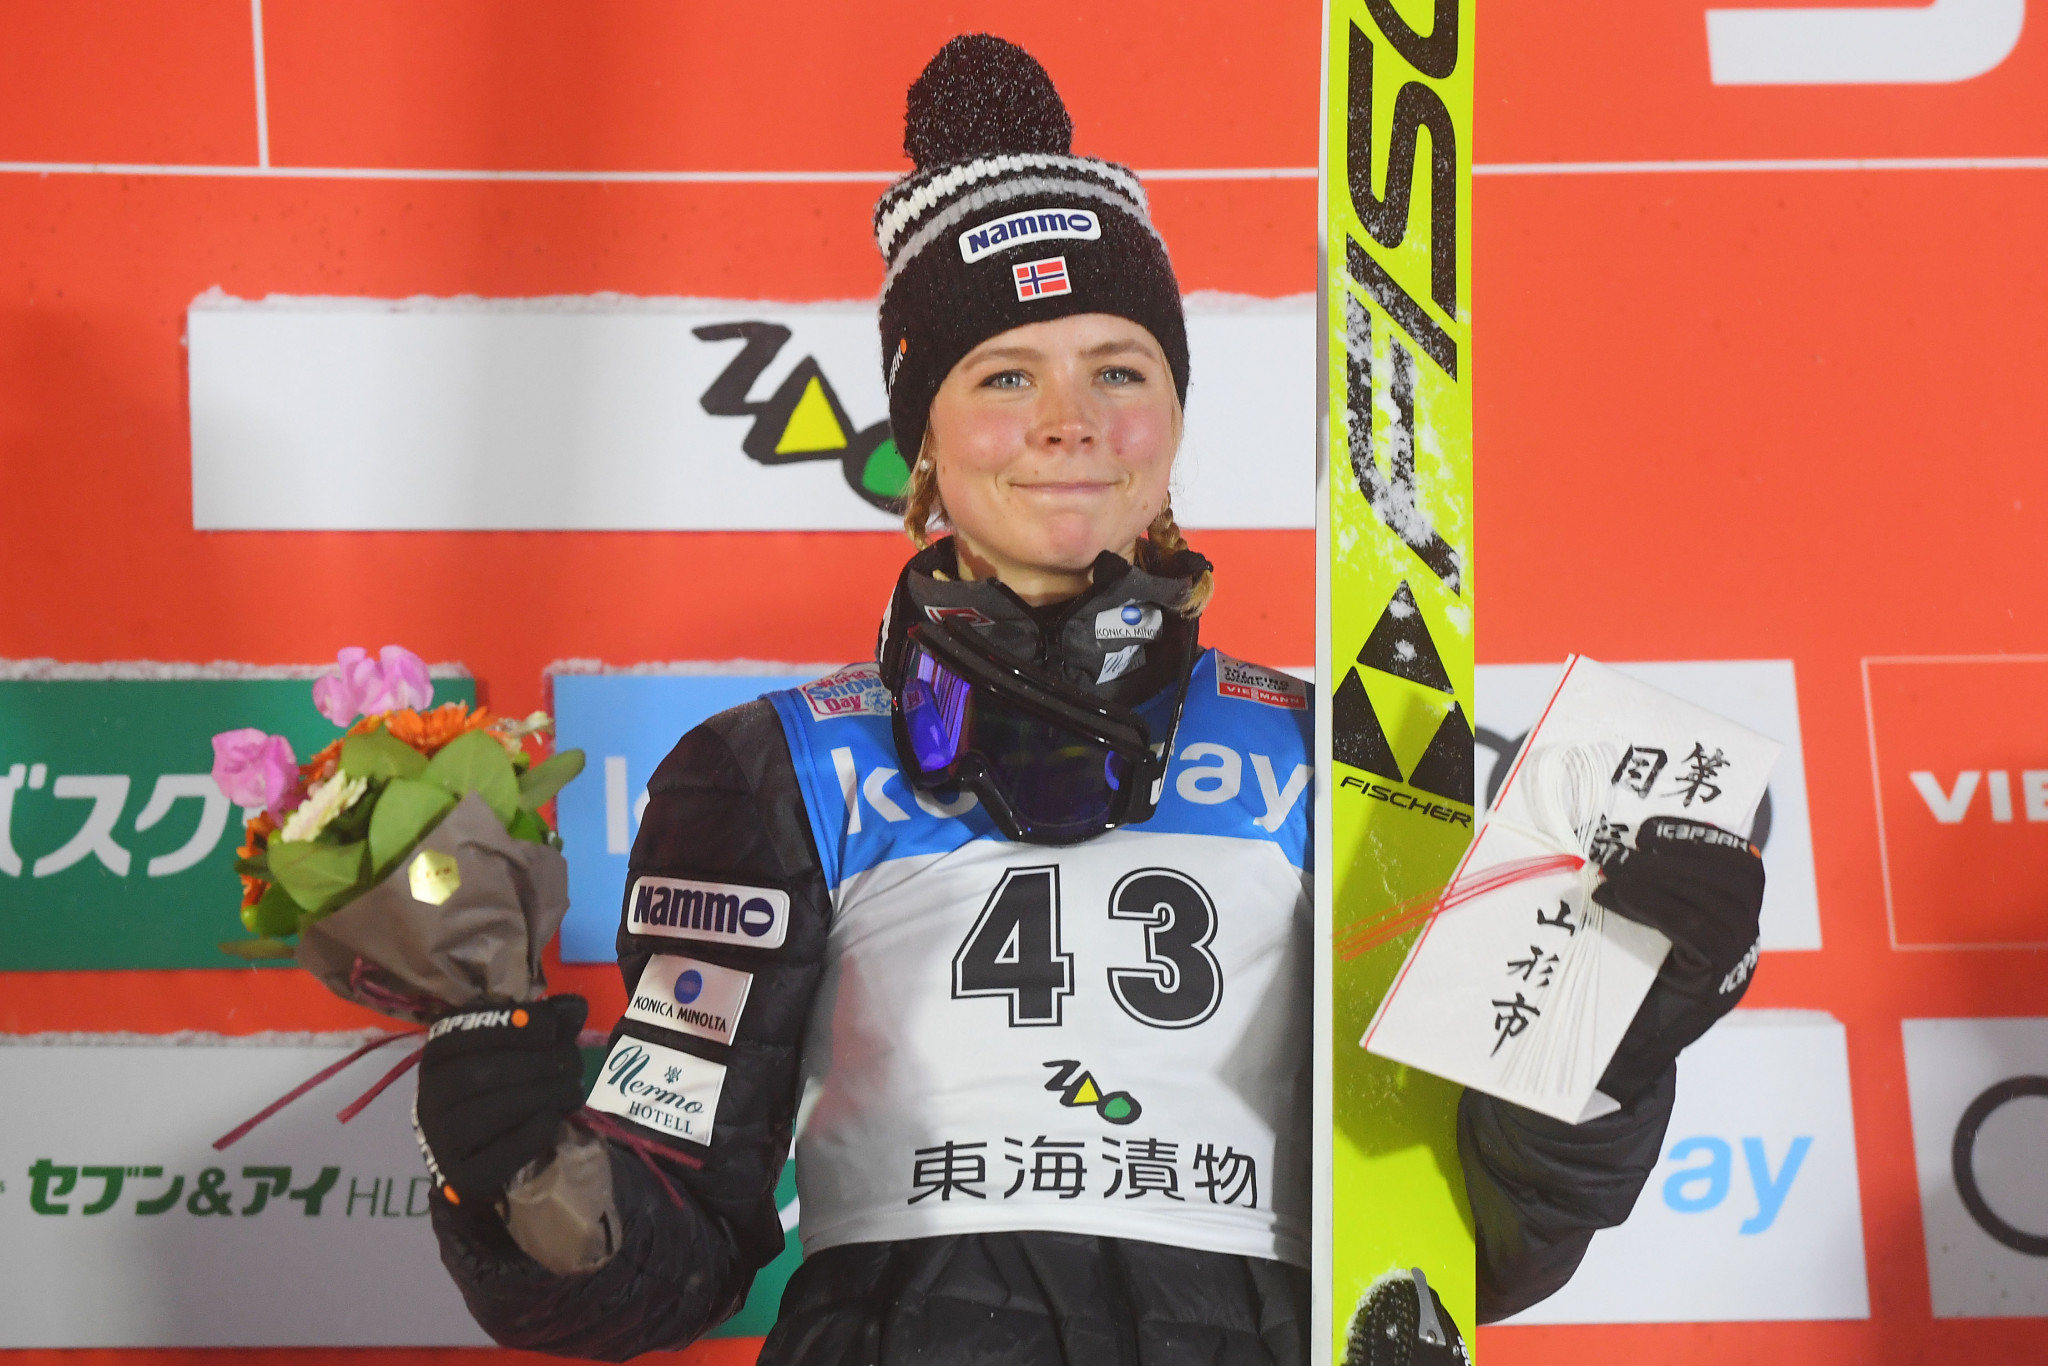 champion at Ski Jumping World Cup event in Zao